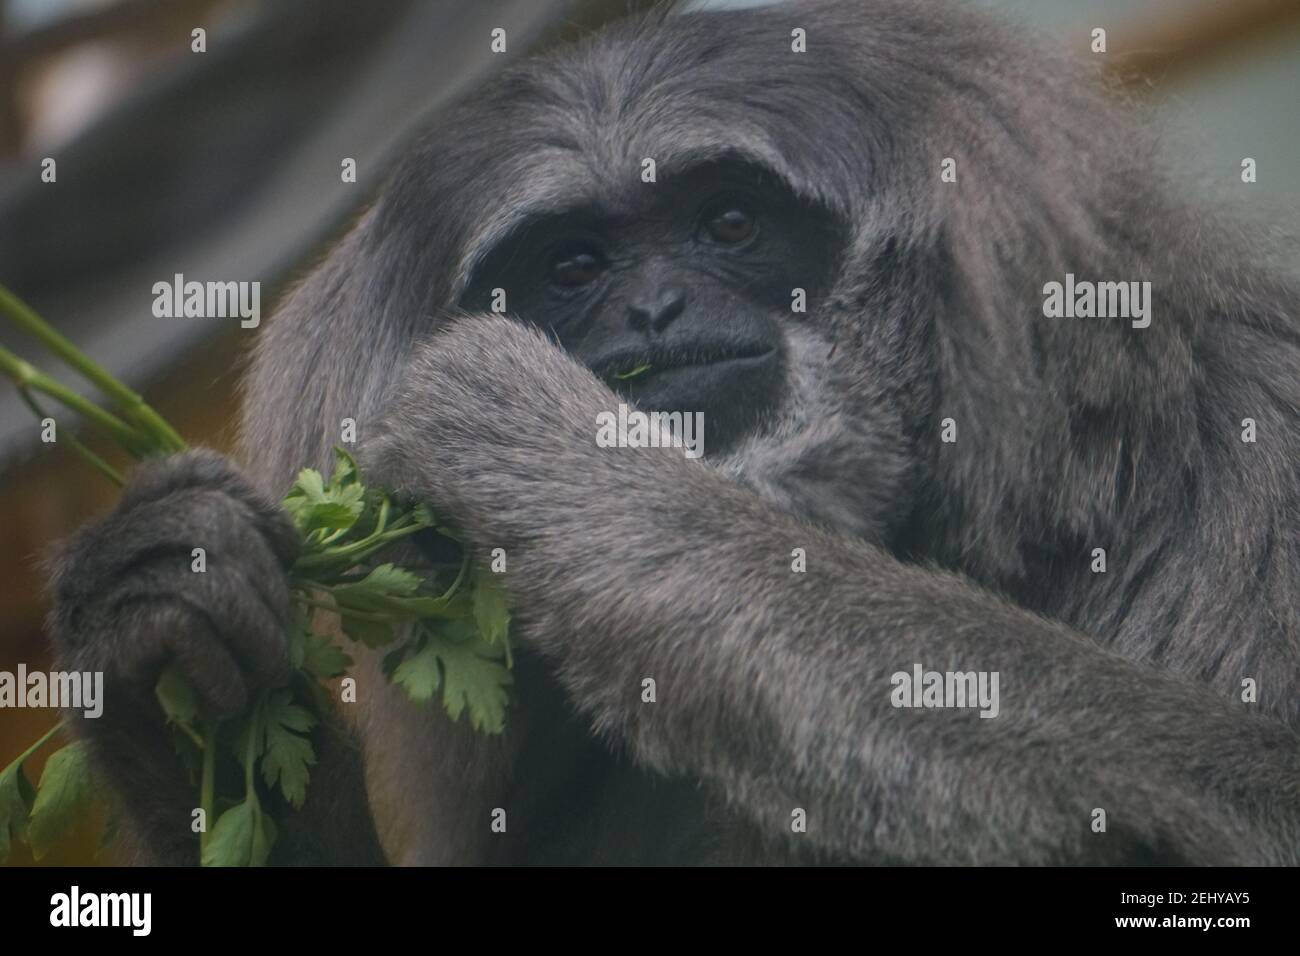 Monkey Is Eating Leaves Stock Photo Stock Images Stock Pictures Stock Photo